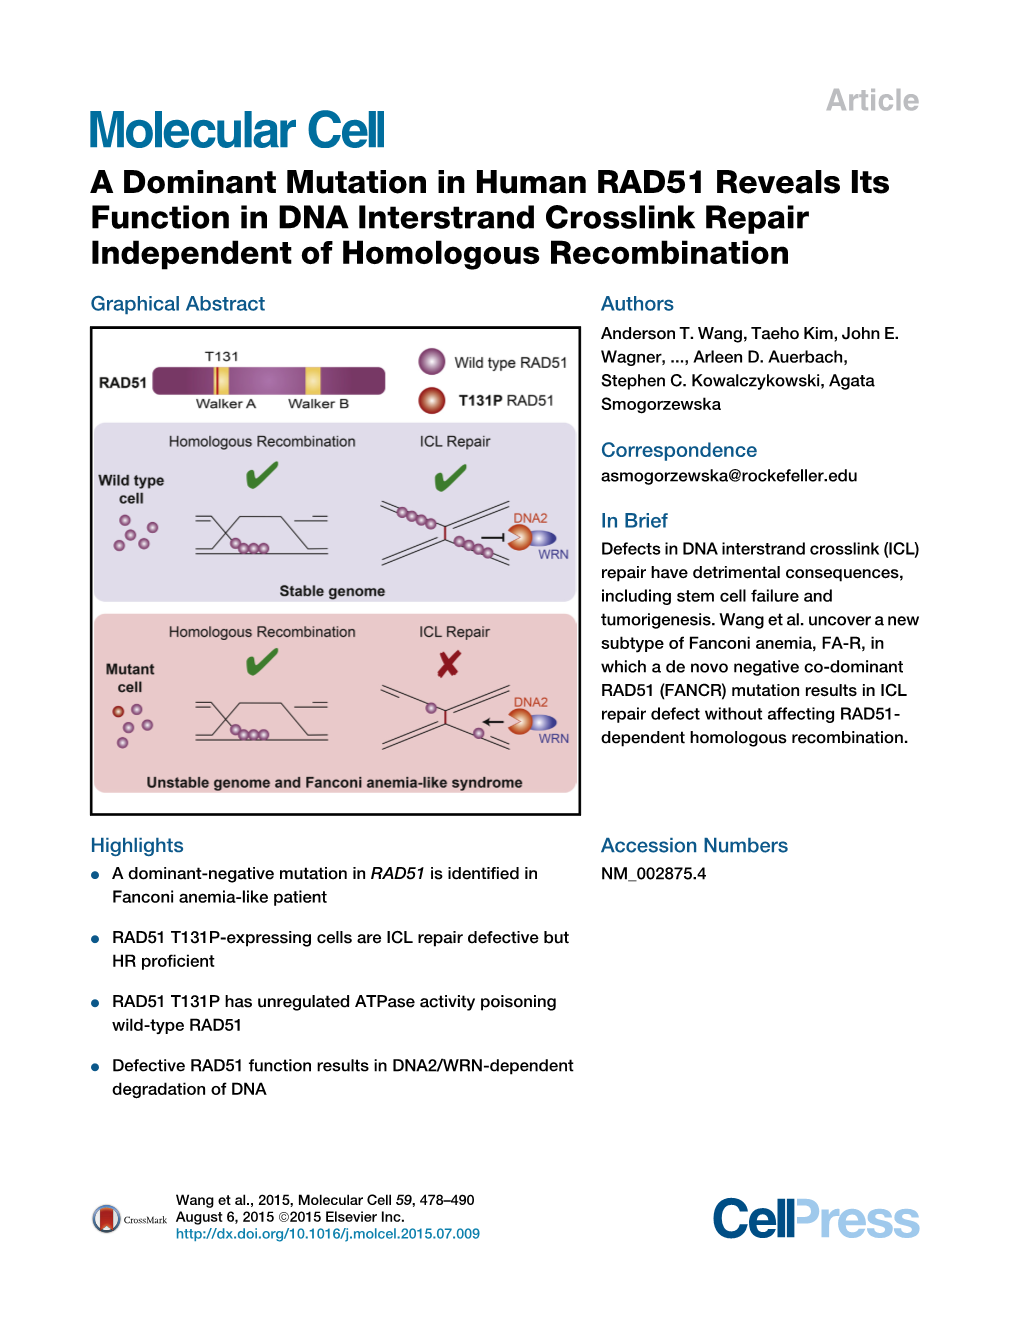 A Dominant Mutation in Human RAD51 Reveals Its Function in DNA Interstrand Crosslink Repair Independent of Homologous Recombination